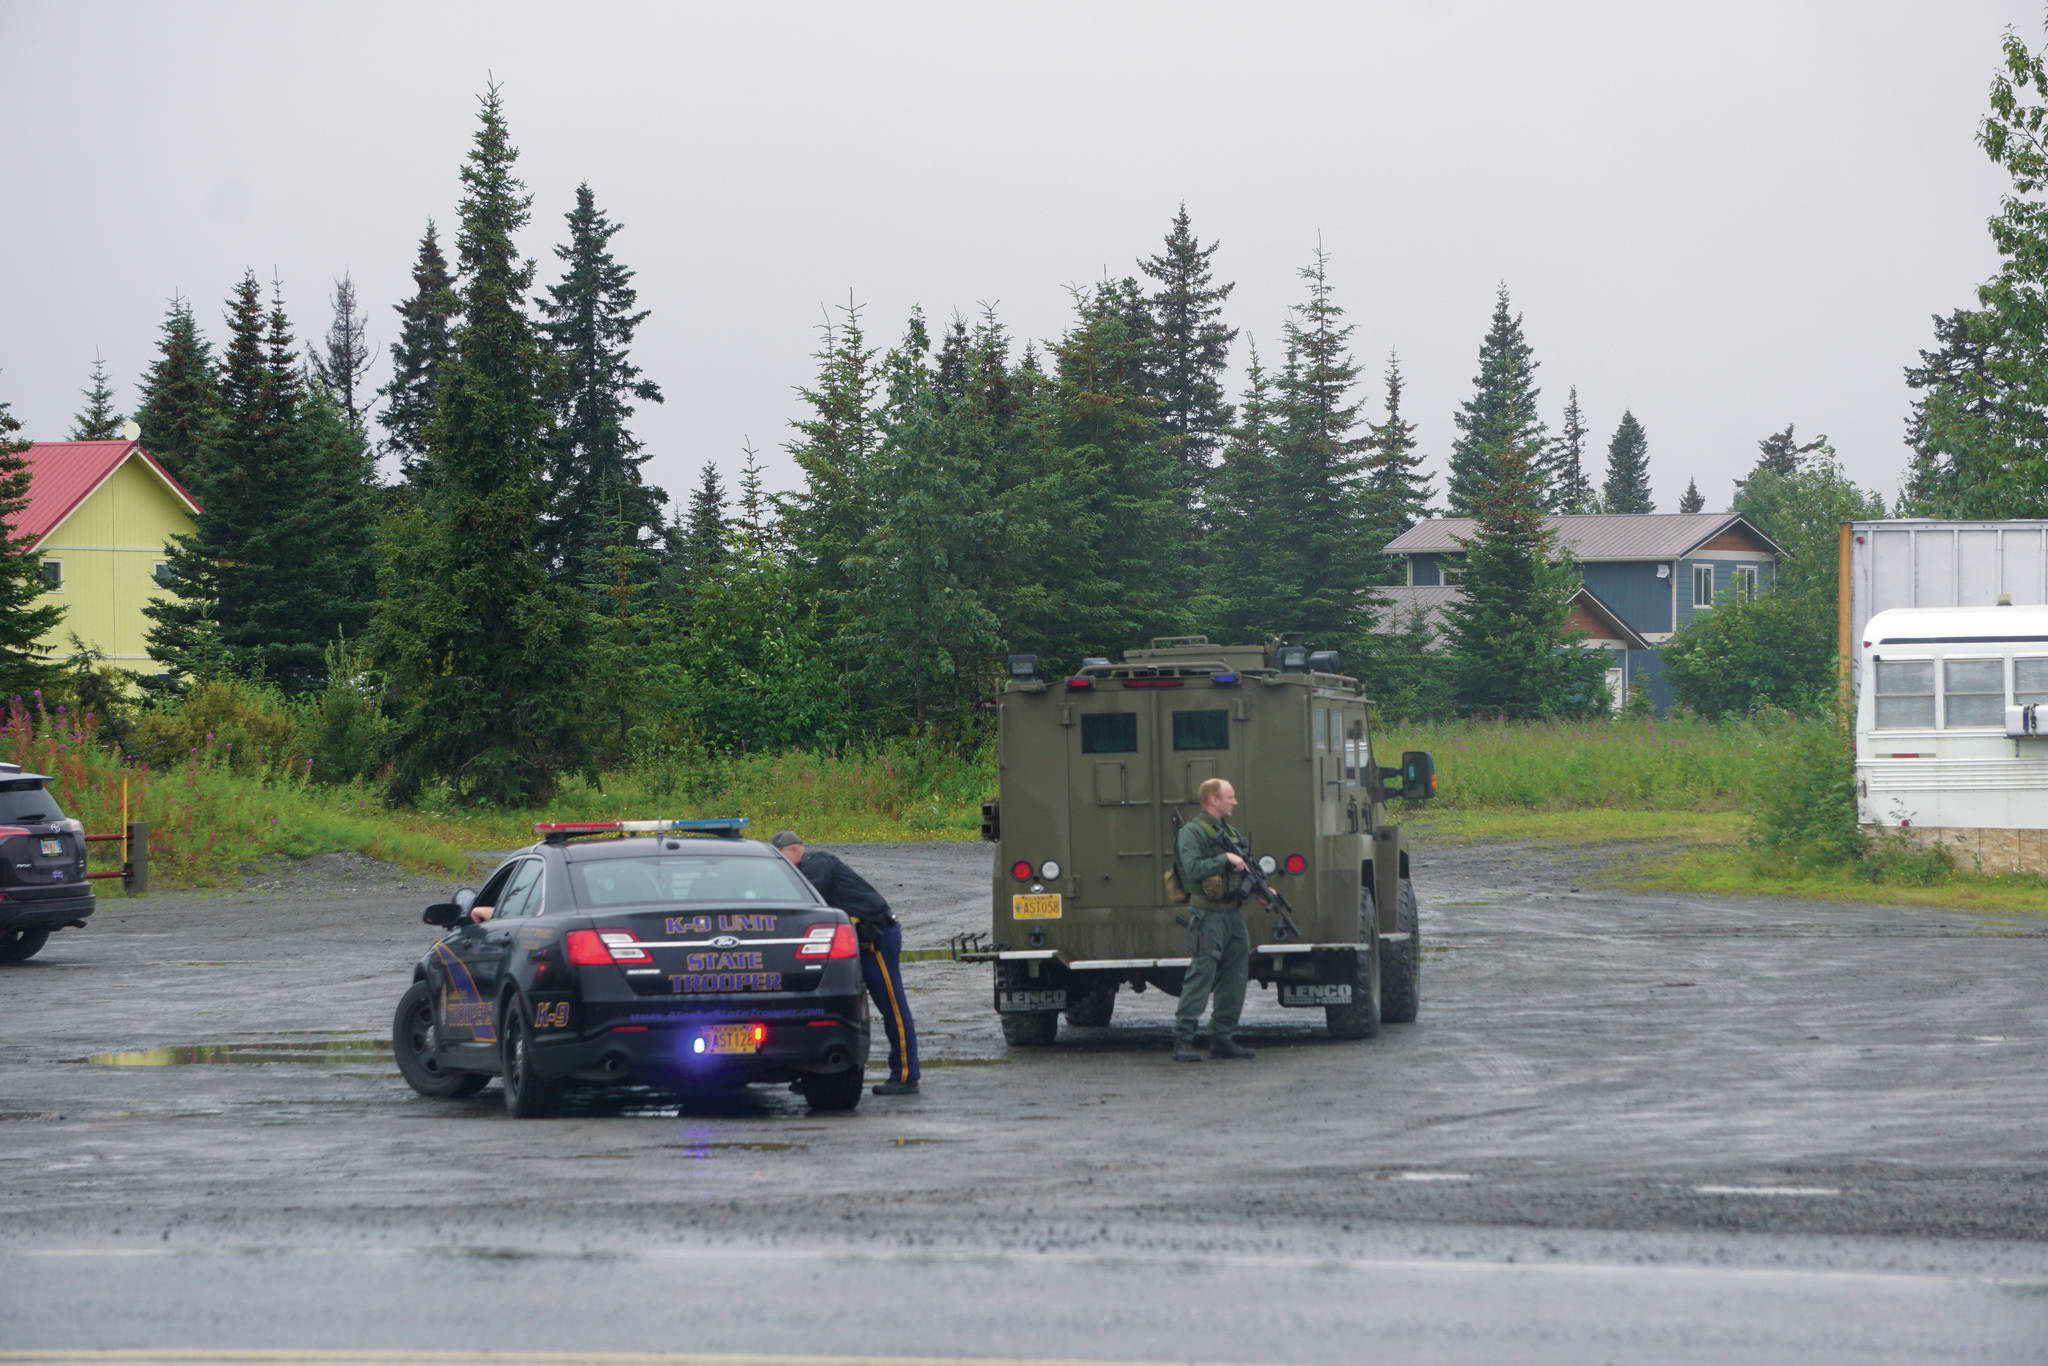 Alaska State Troopers and members of the Special Emergency Reaction Team respond at a shooting scene on Monday, Aug. 23, 2021, at the Anchor Point Warehouse in Anchor Point, Alaska, on the Sterling Highway. An Alaska State Trooper was shot and is in fair condition at an Anchorage hospital. Troopers arrested the suspect, Bret Herrick, 60, on Tuesday morning, Aug. 24, 2021. (Photo by Michael Armstrong/Homer News)